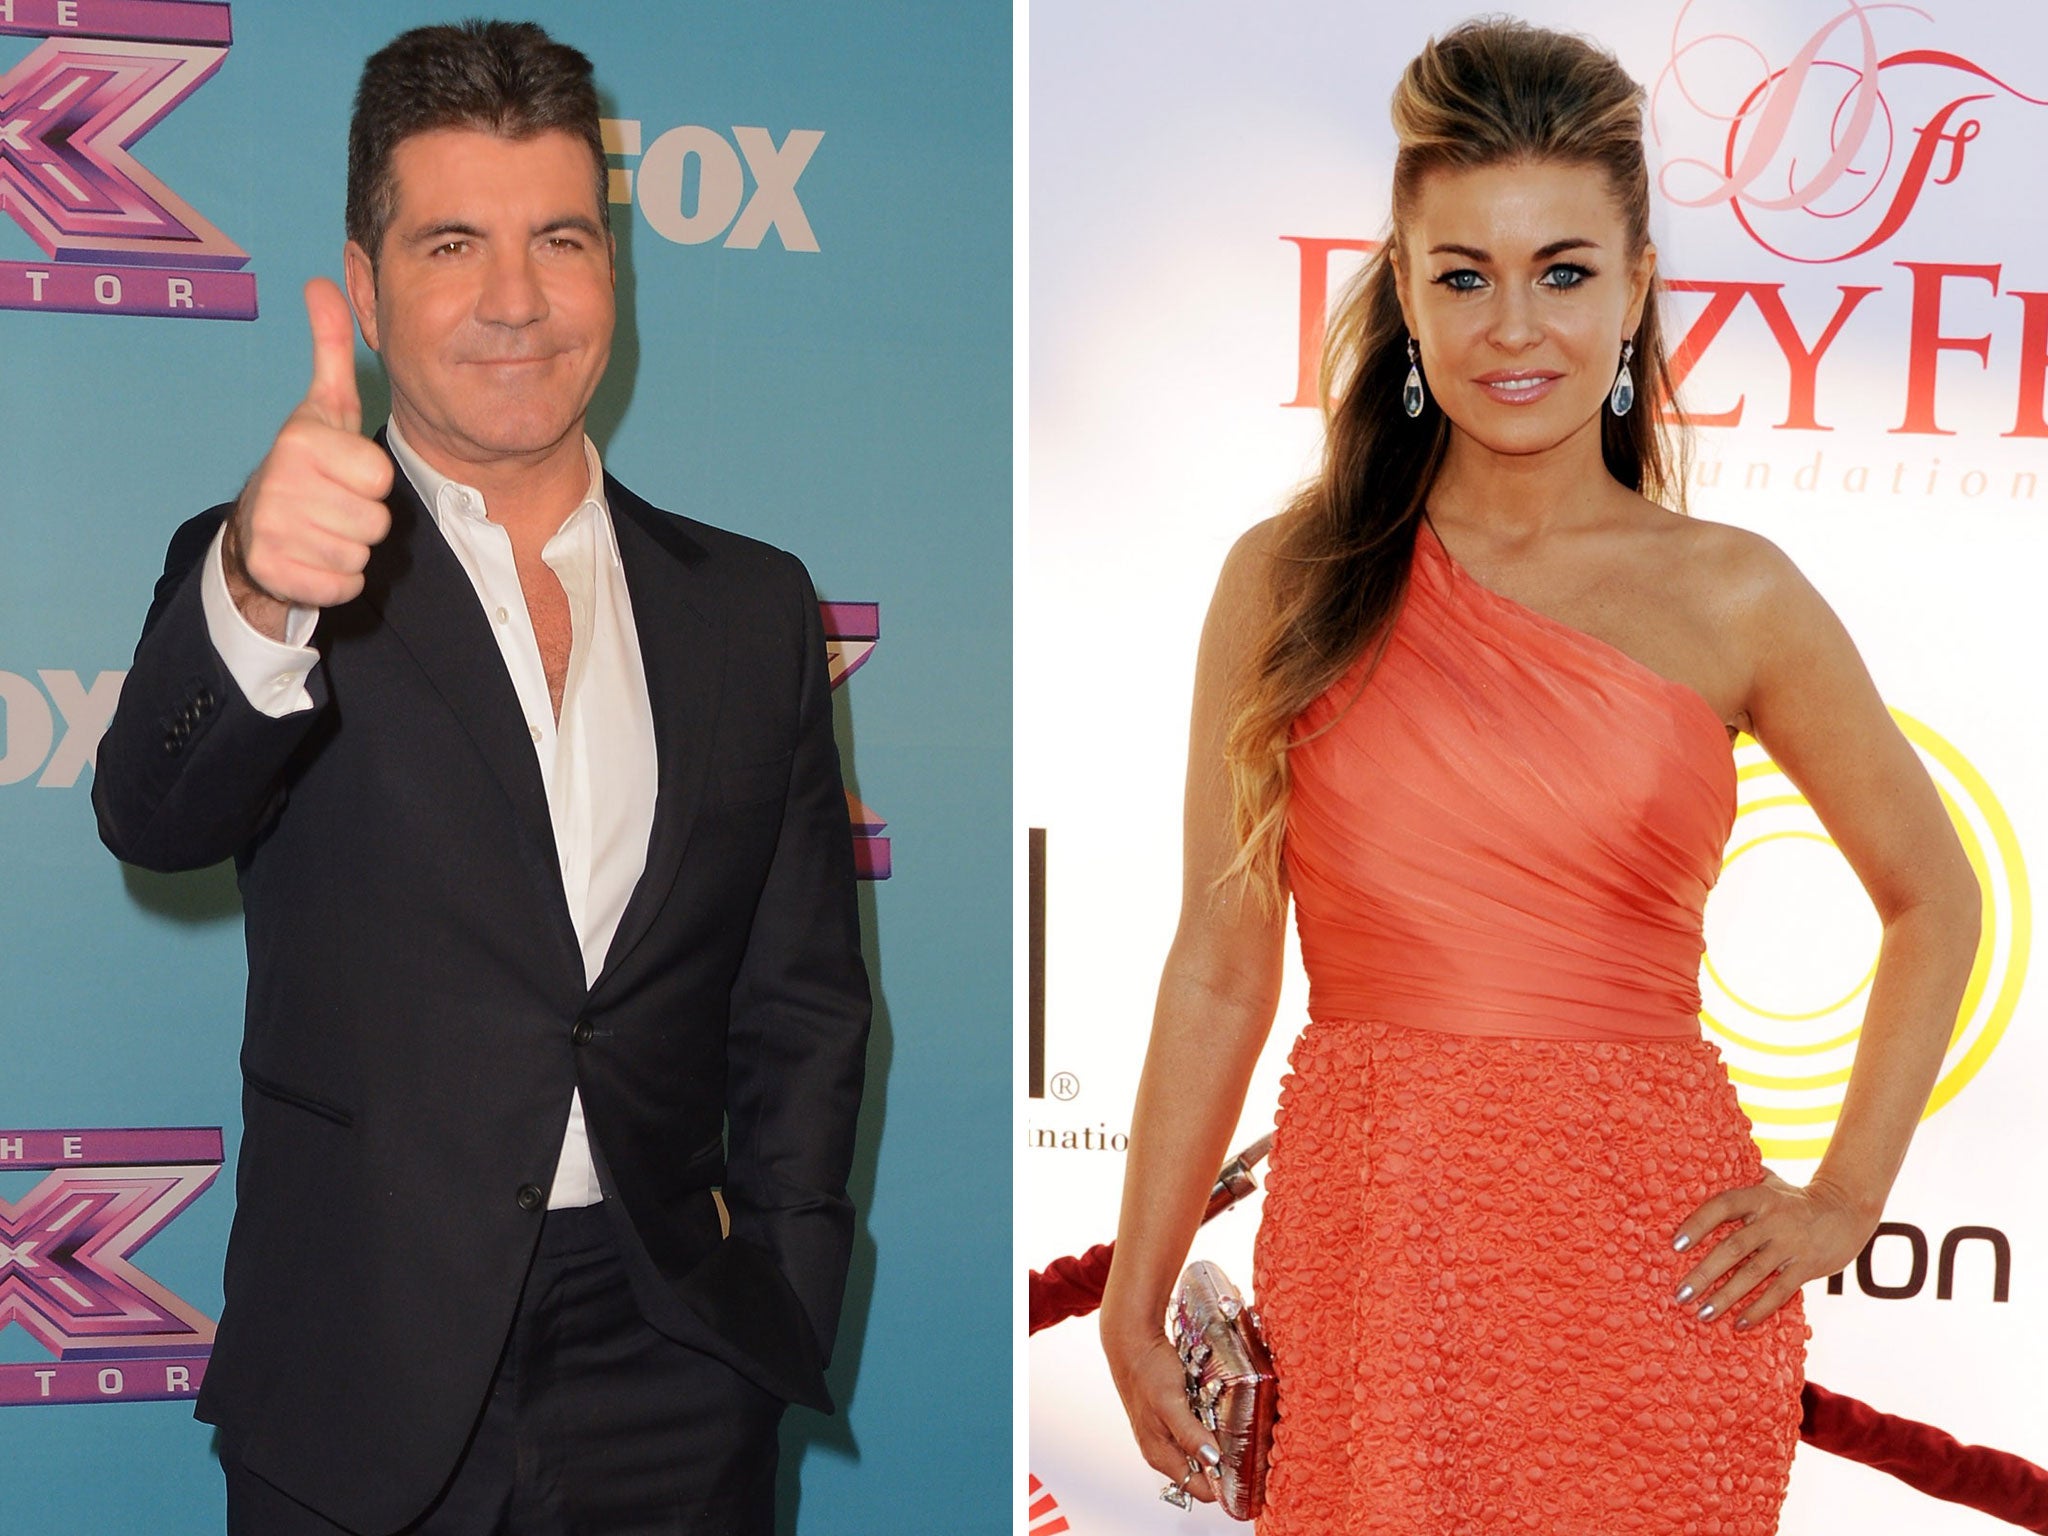 Simon Cowell and Carmen Electra. Verdict: The jury's out